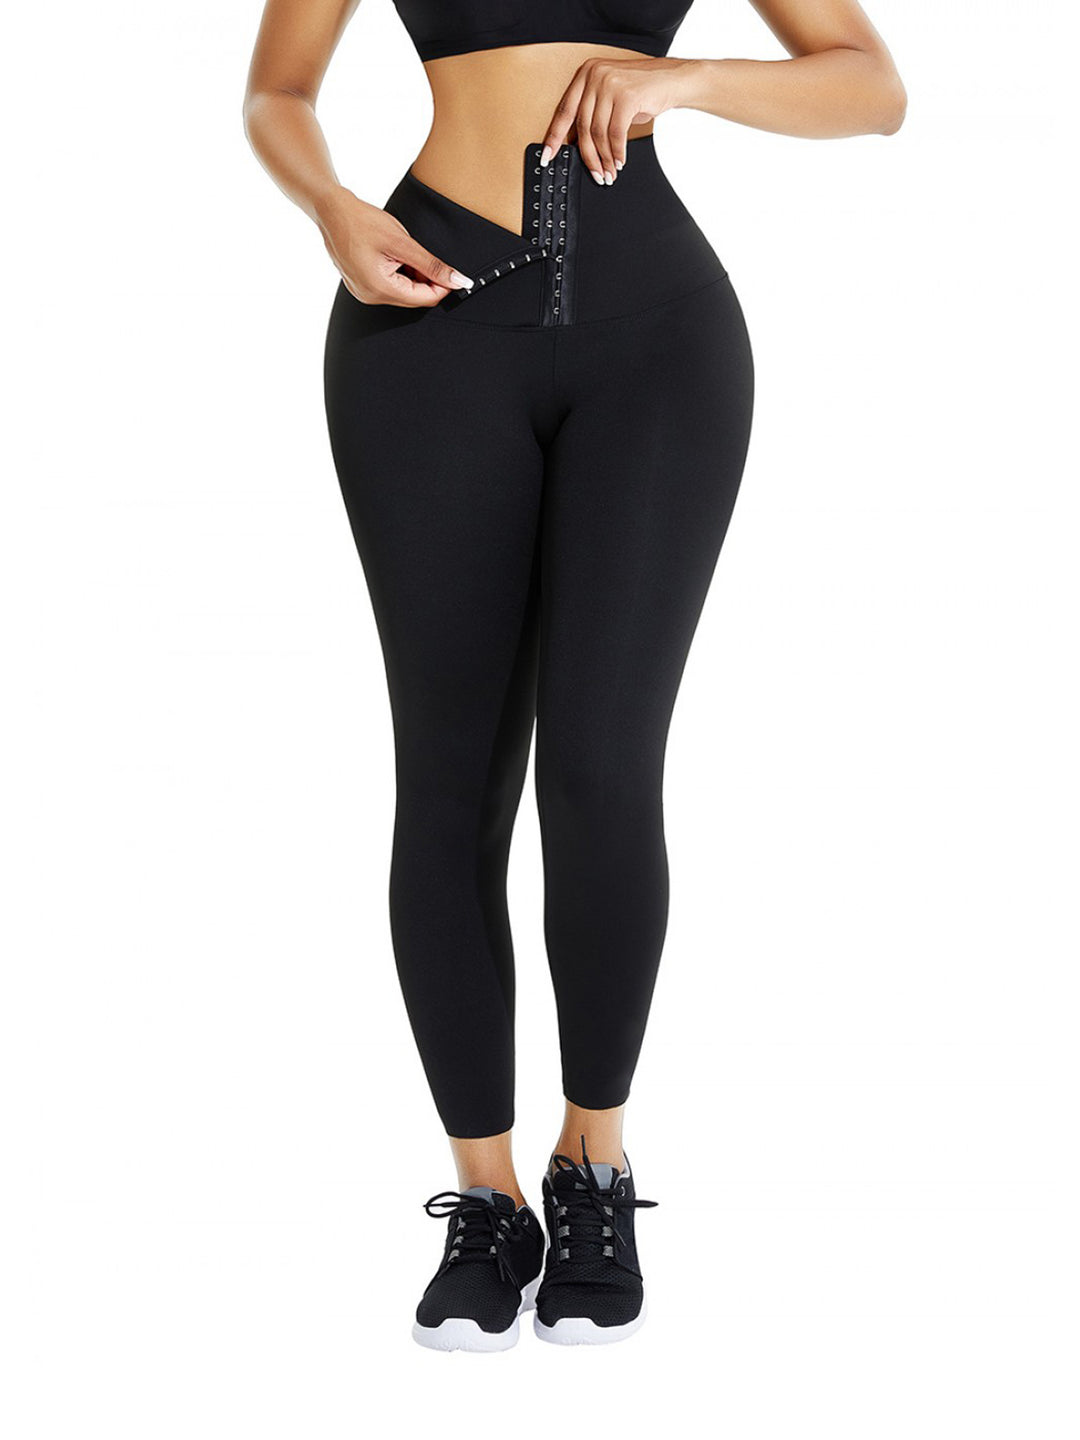 New Full Shaping Legging With Double Layer 5 Waistband - Black